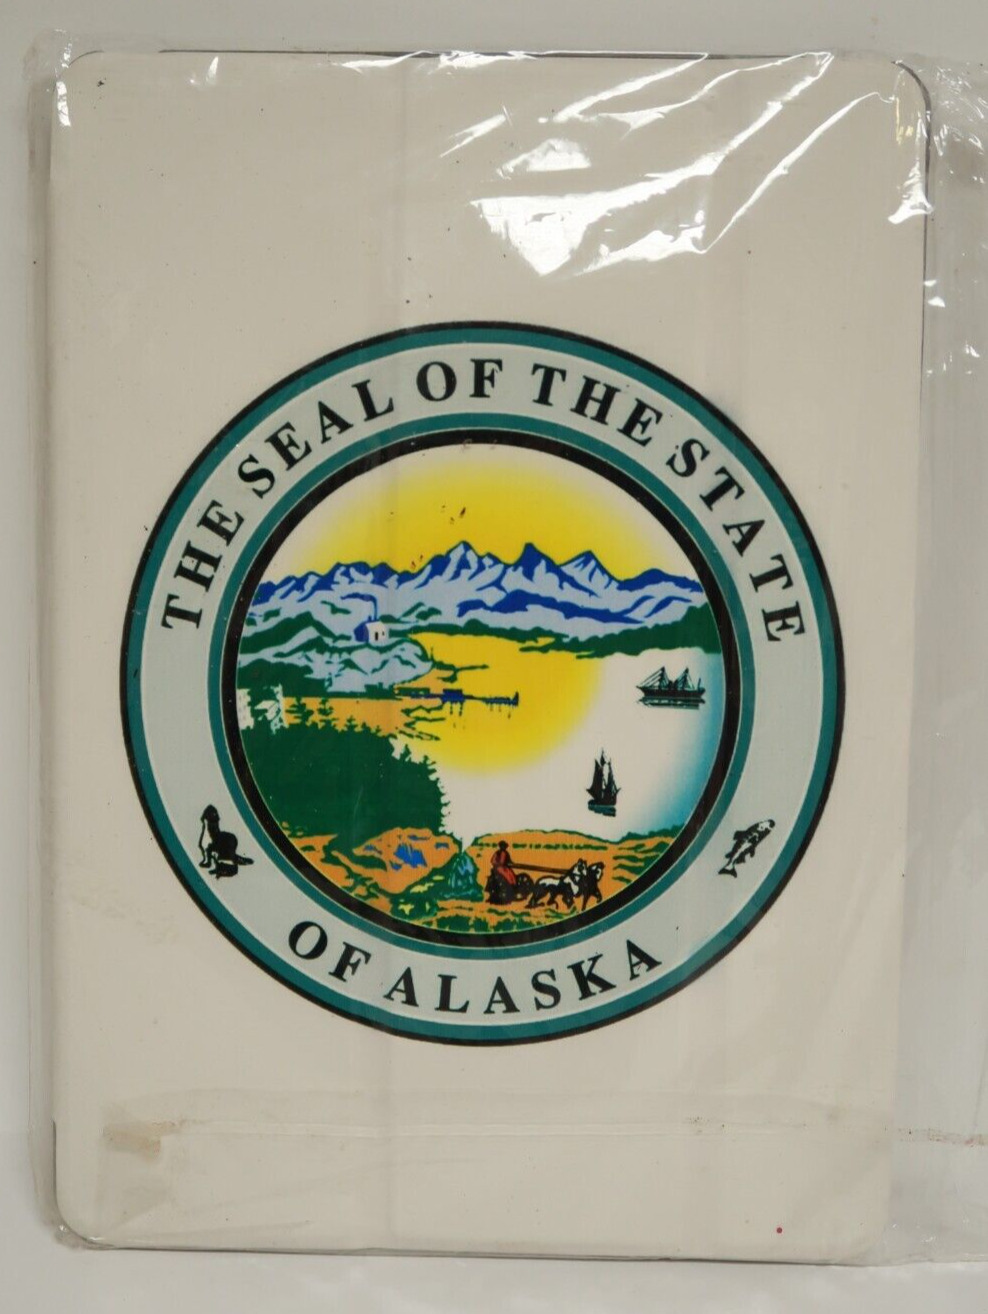 The Seal of the State of Alaska for IP 6 Air 2 Cover Apple IPAD 6